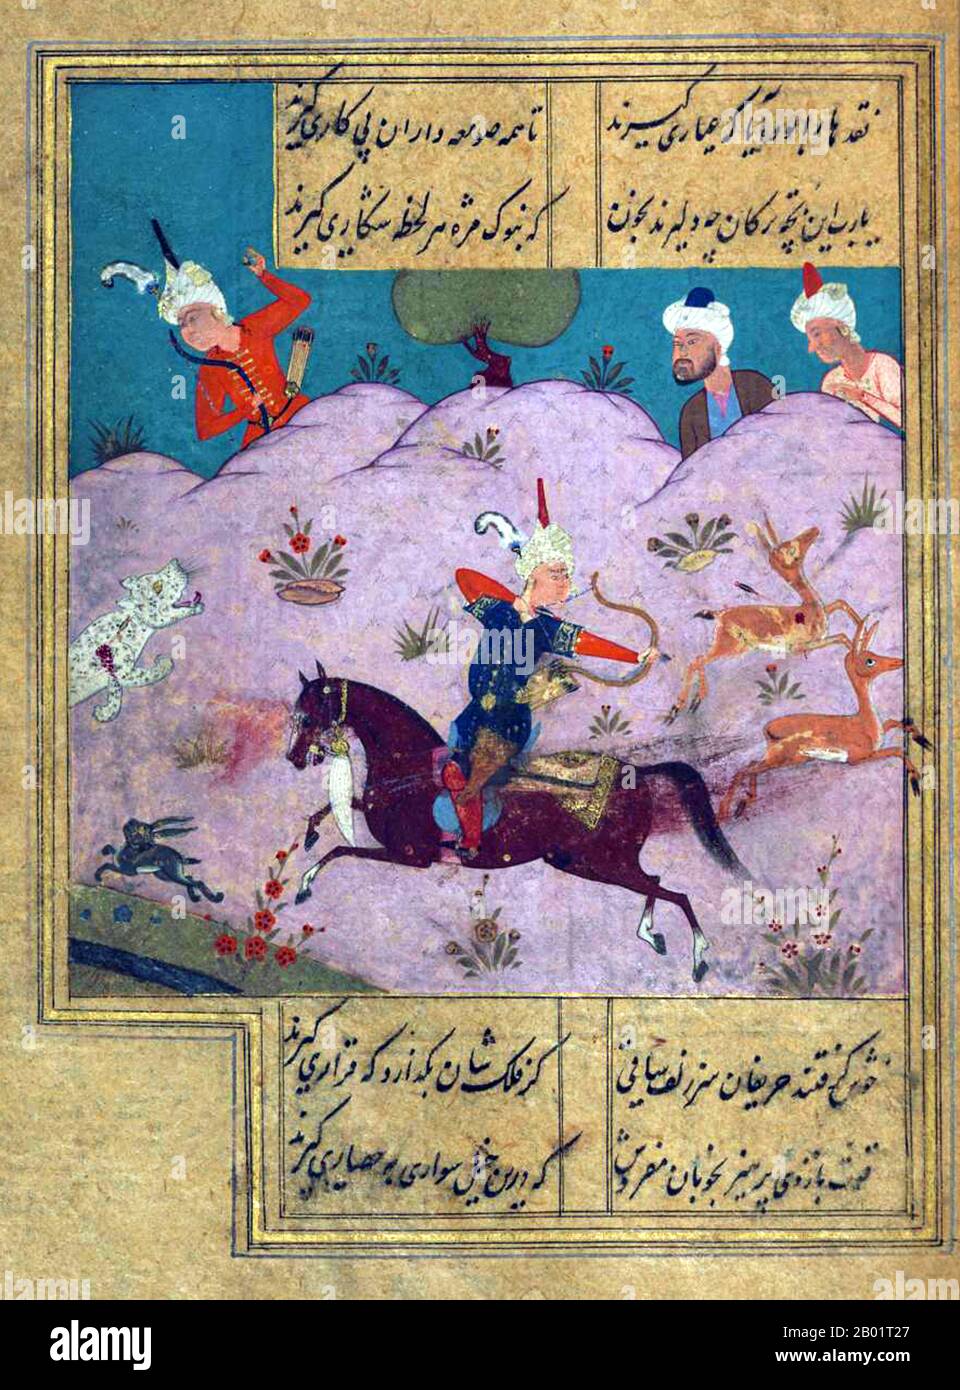 Iran/Persia: A hunting scene Folio from a divan of Hafez Shirazi (c. 1325-1390), 16th century.  Khwāja Shamsu d-Dīn Muhammad Hāfez-e Shīrāzī, known by his pen name Hāfez, was a Persian lyric poet. His collected works composed of series of Persian poetry (Divan) are to be found in the homes of most Persian speakers in Iran and Afghanistan, as well as elsewhere in the world, who learn his poems by heart and use them as proverbs and sayings to this day. His life and poems have been the subject of much analysis, commentary and interpretation. Stock Photo